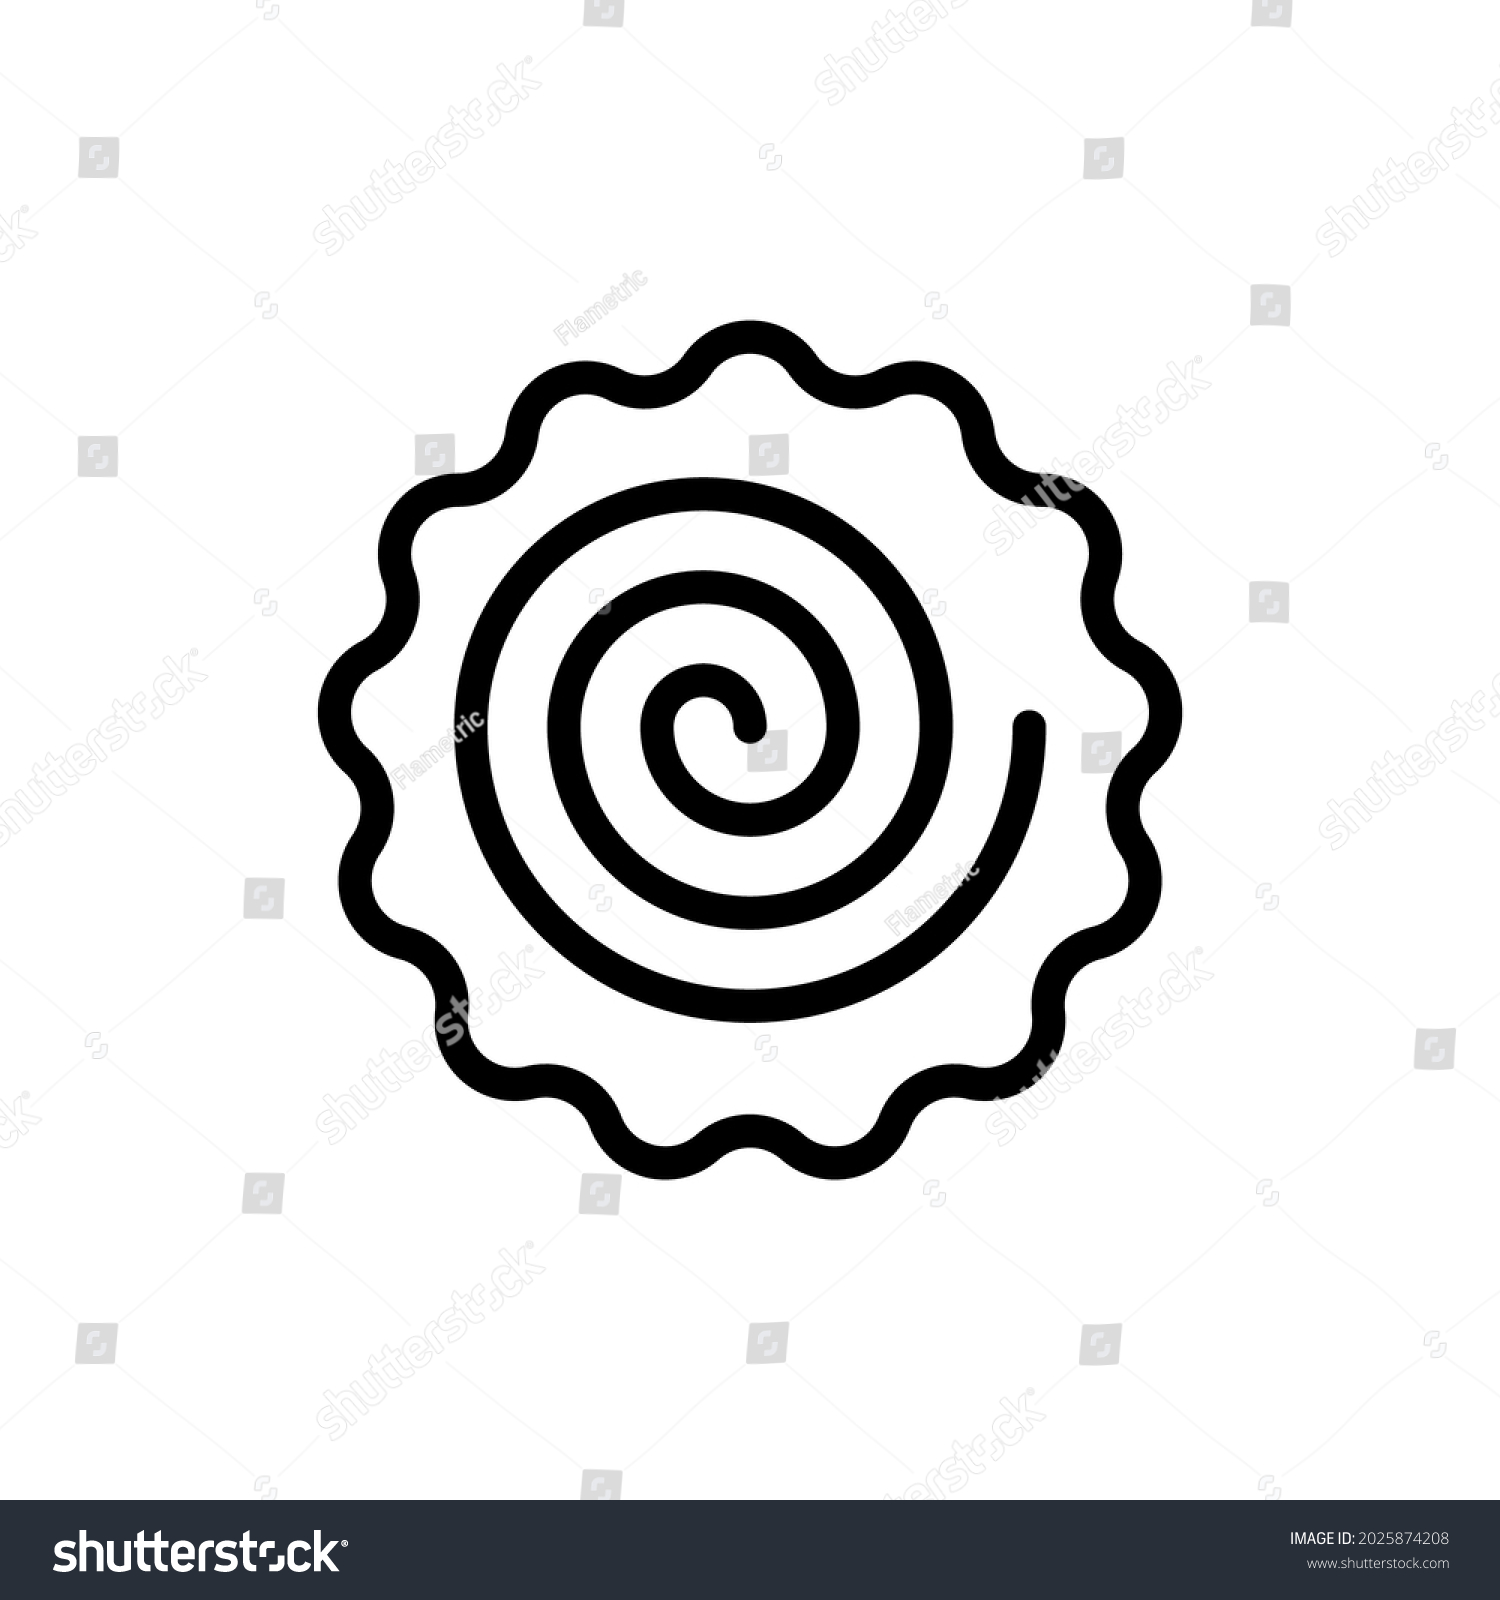 SVG of Narutomaki or kamaboko surimi vector outline icon. Traditional Japanese naruto steamed fish cake with swirl in the center. Topping for ramen noodle soup isolated illustration. svg